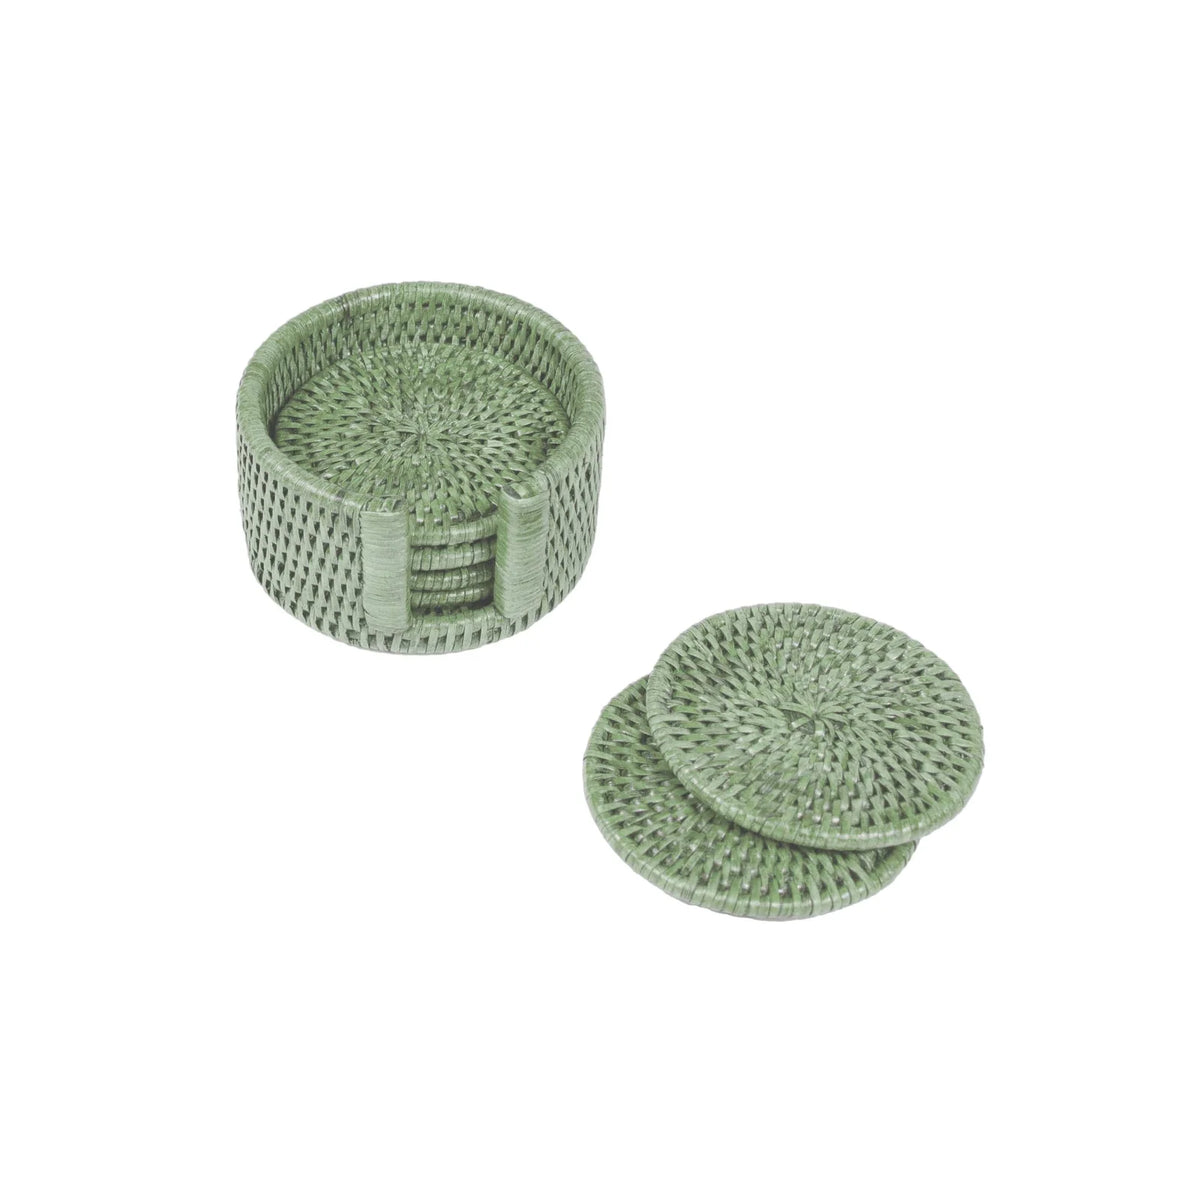 Rattan Round Coaster and Holder Set in Green